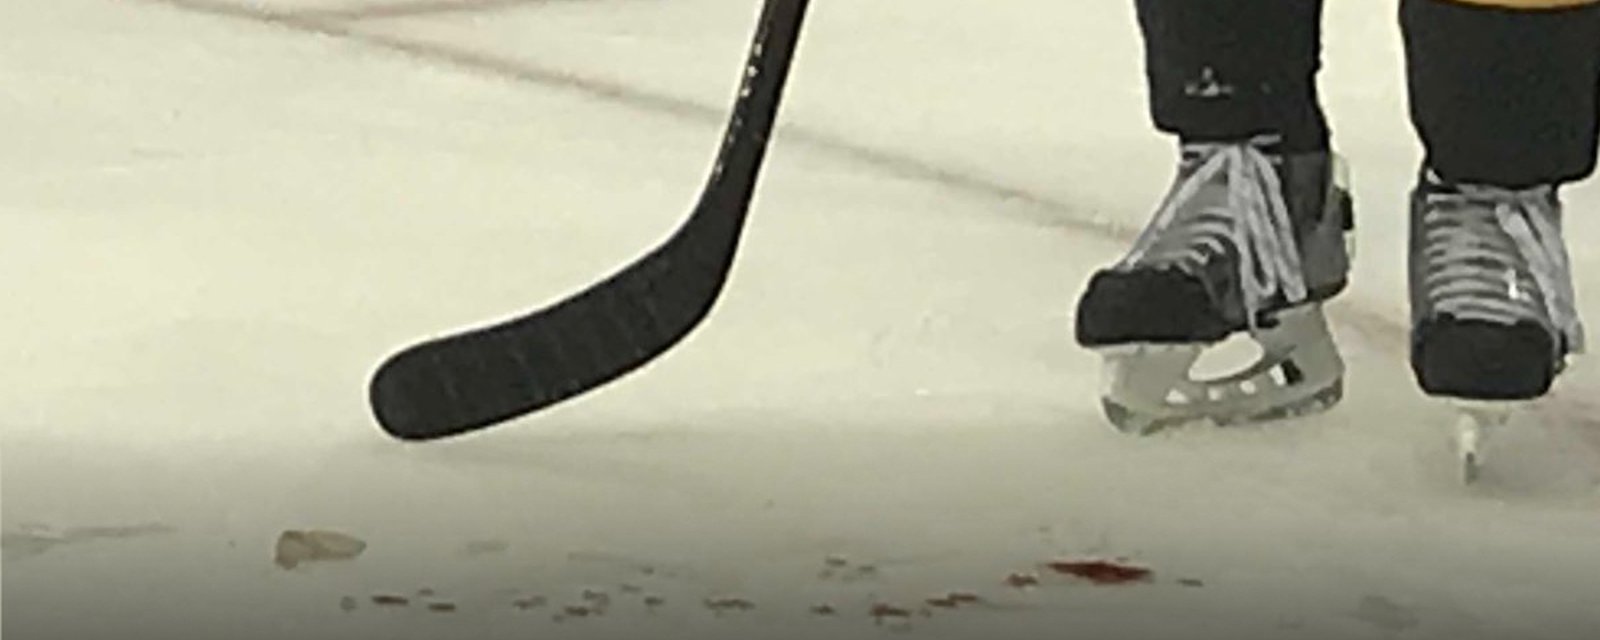 Must see: Gruesome injury leaves bloody mess on ice